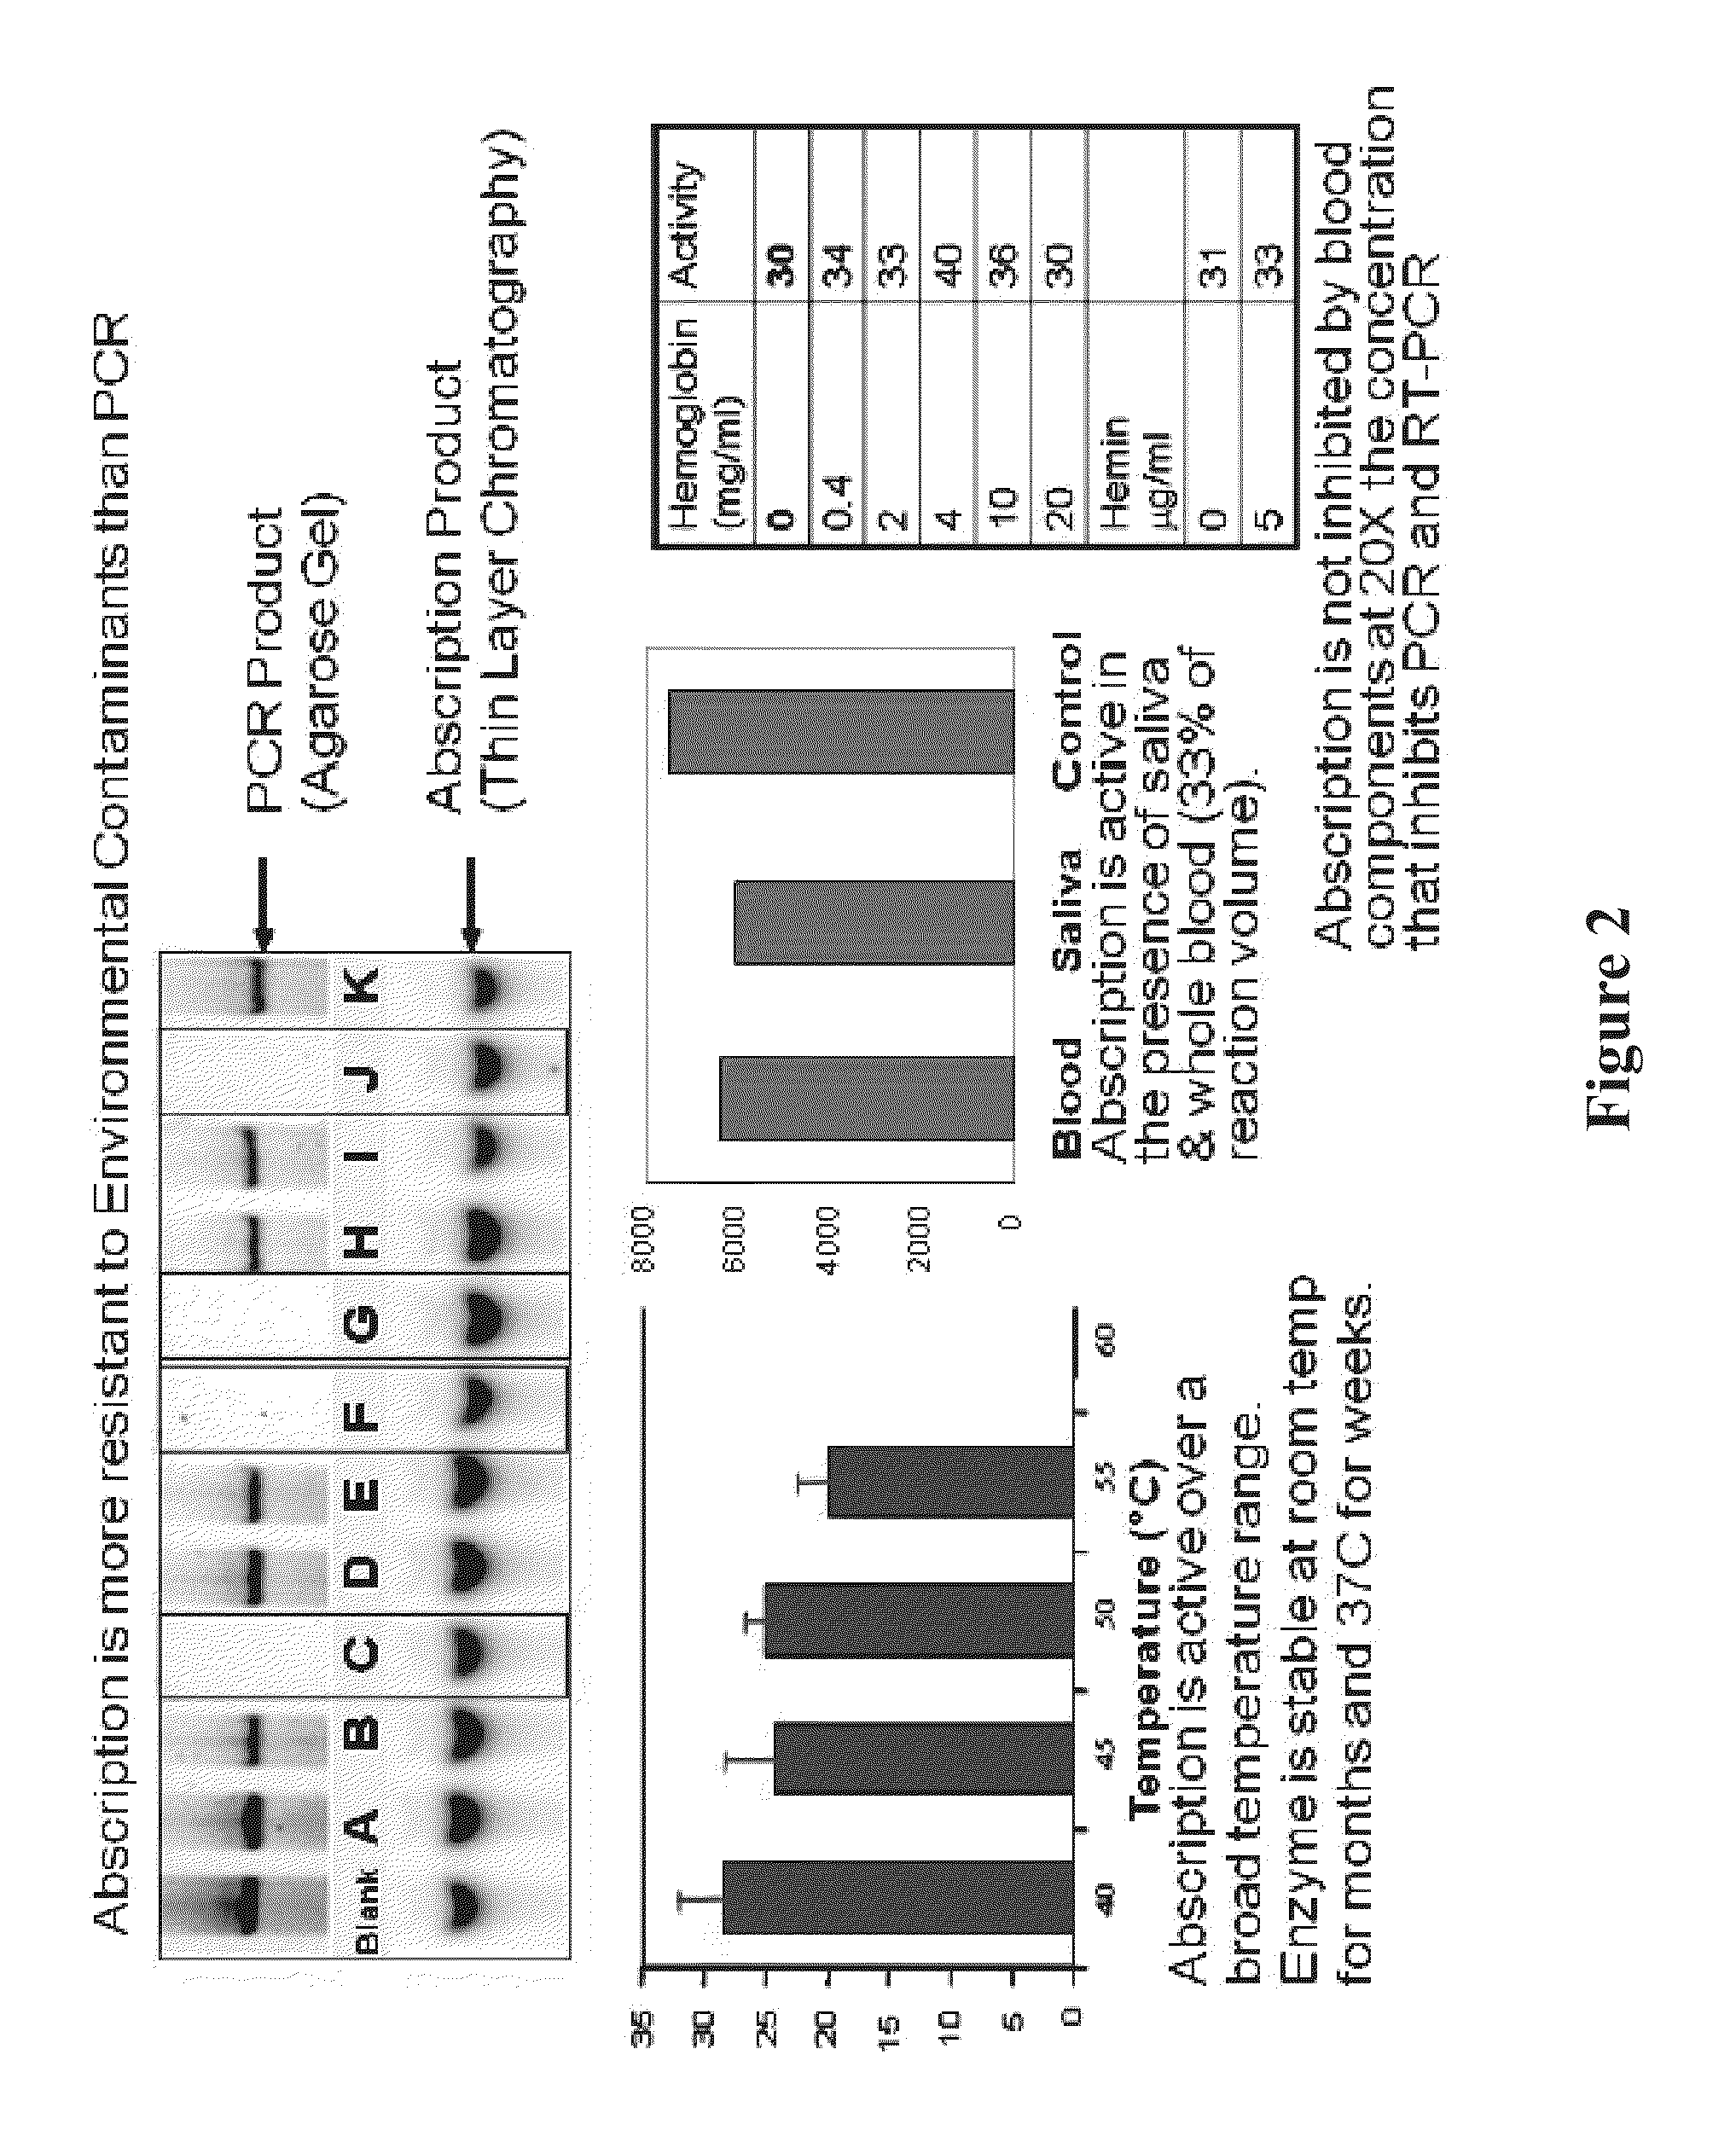 METHODS AND REAGENTS FOR DETECTING CpG METHYLATION WITH A METHYL CpG BINDING PROTEIN (MBP)